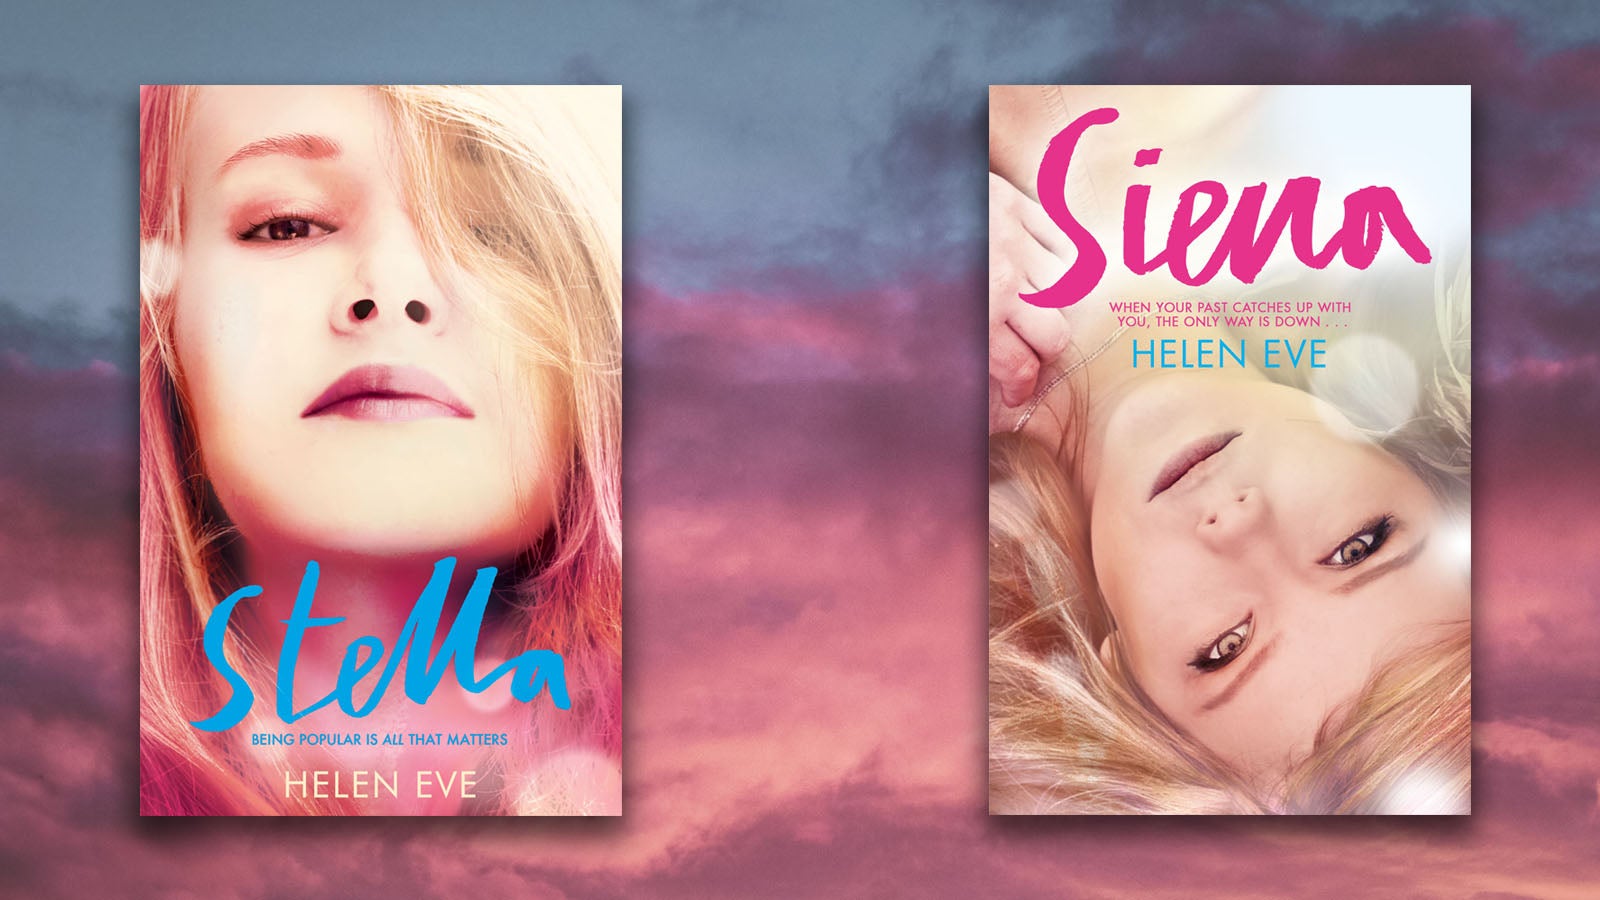 Stella and Sienna book jackets against a cloudy sky